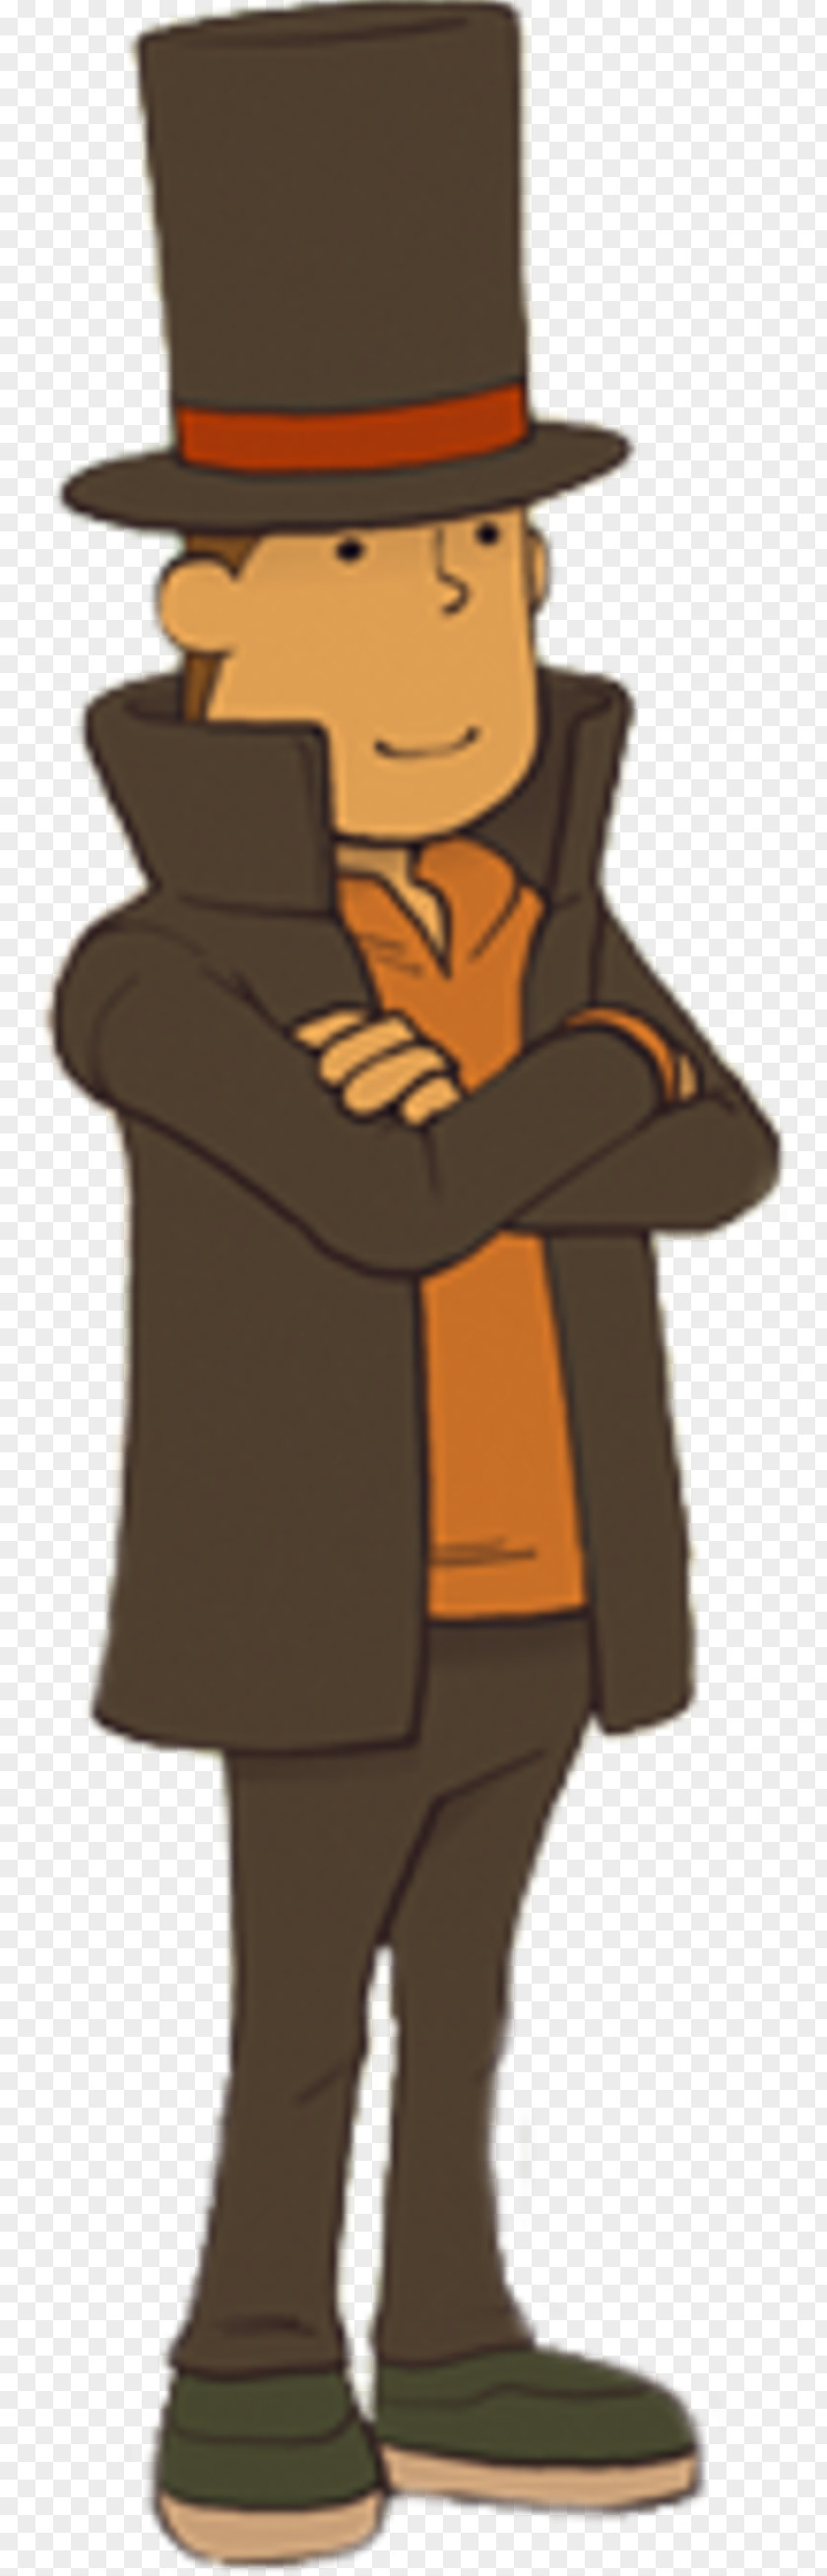 Professor Layton Vs. Phoenix Wright: Ace Attorney And The Diabolical Box Azran Legacies Hershel Curious Village PNG